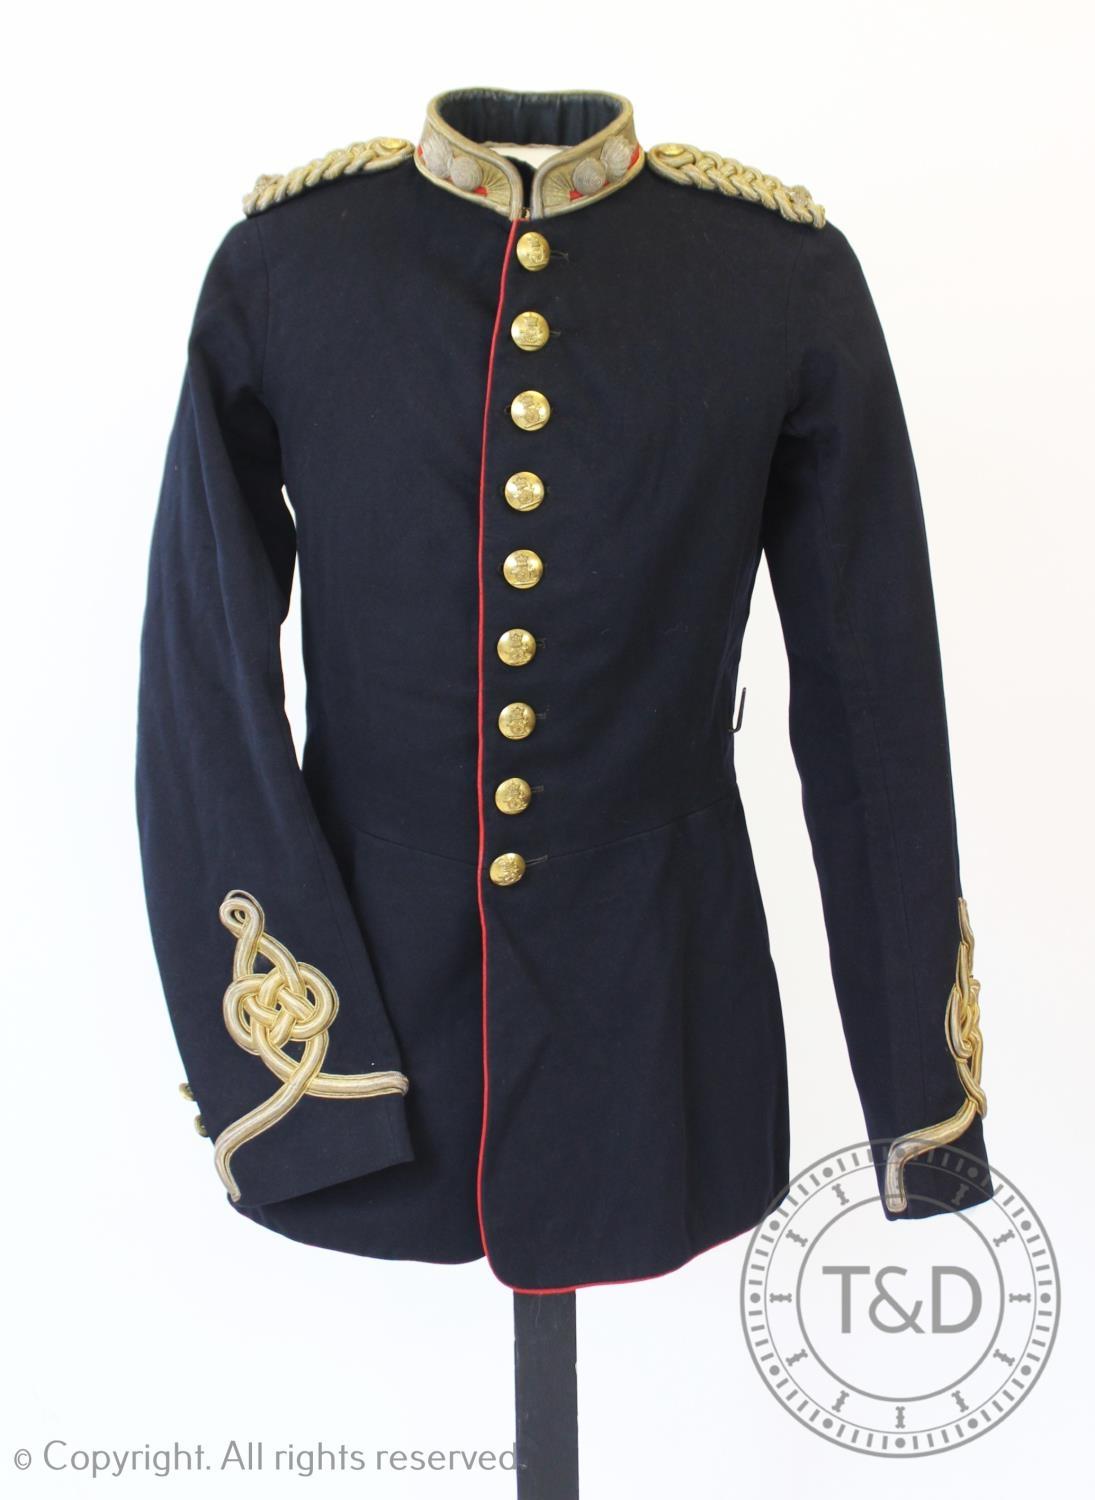 An early 20th century Royal Artillery military tunic, the navy facecloth jacket with Royal Artillery